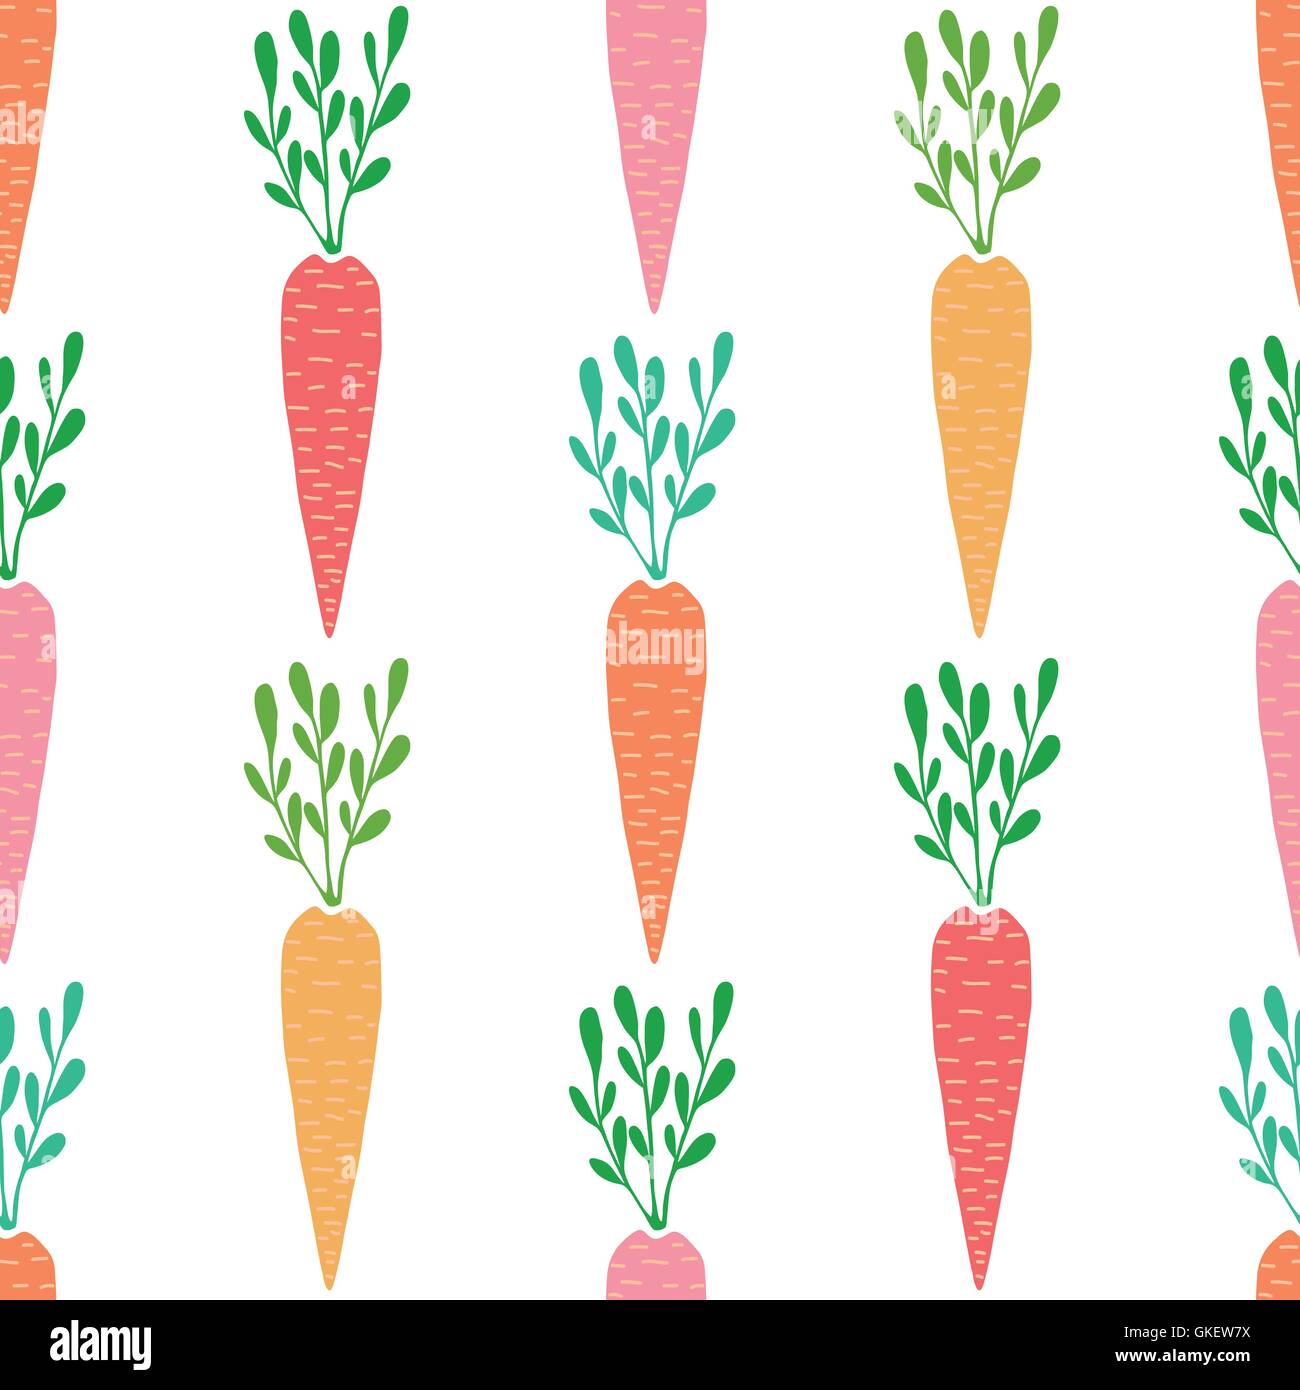 Vector yummy carrots seamless pattern background Stock Vector